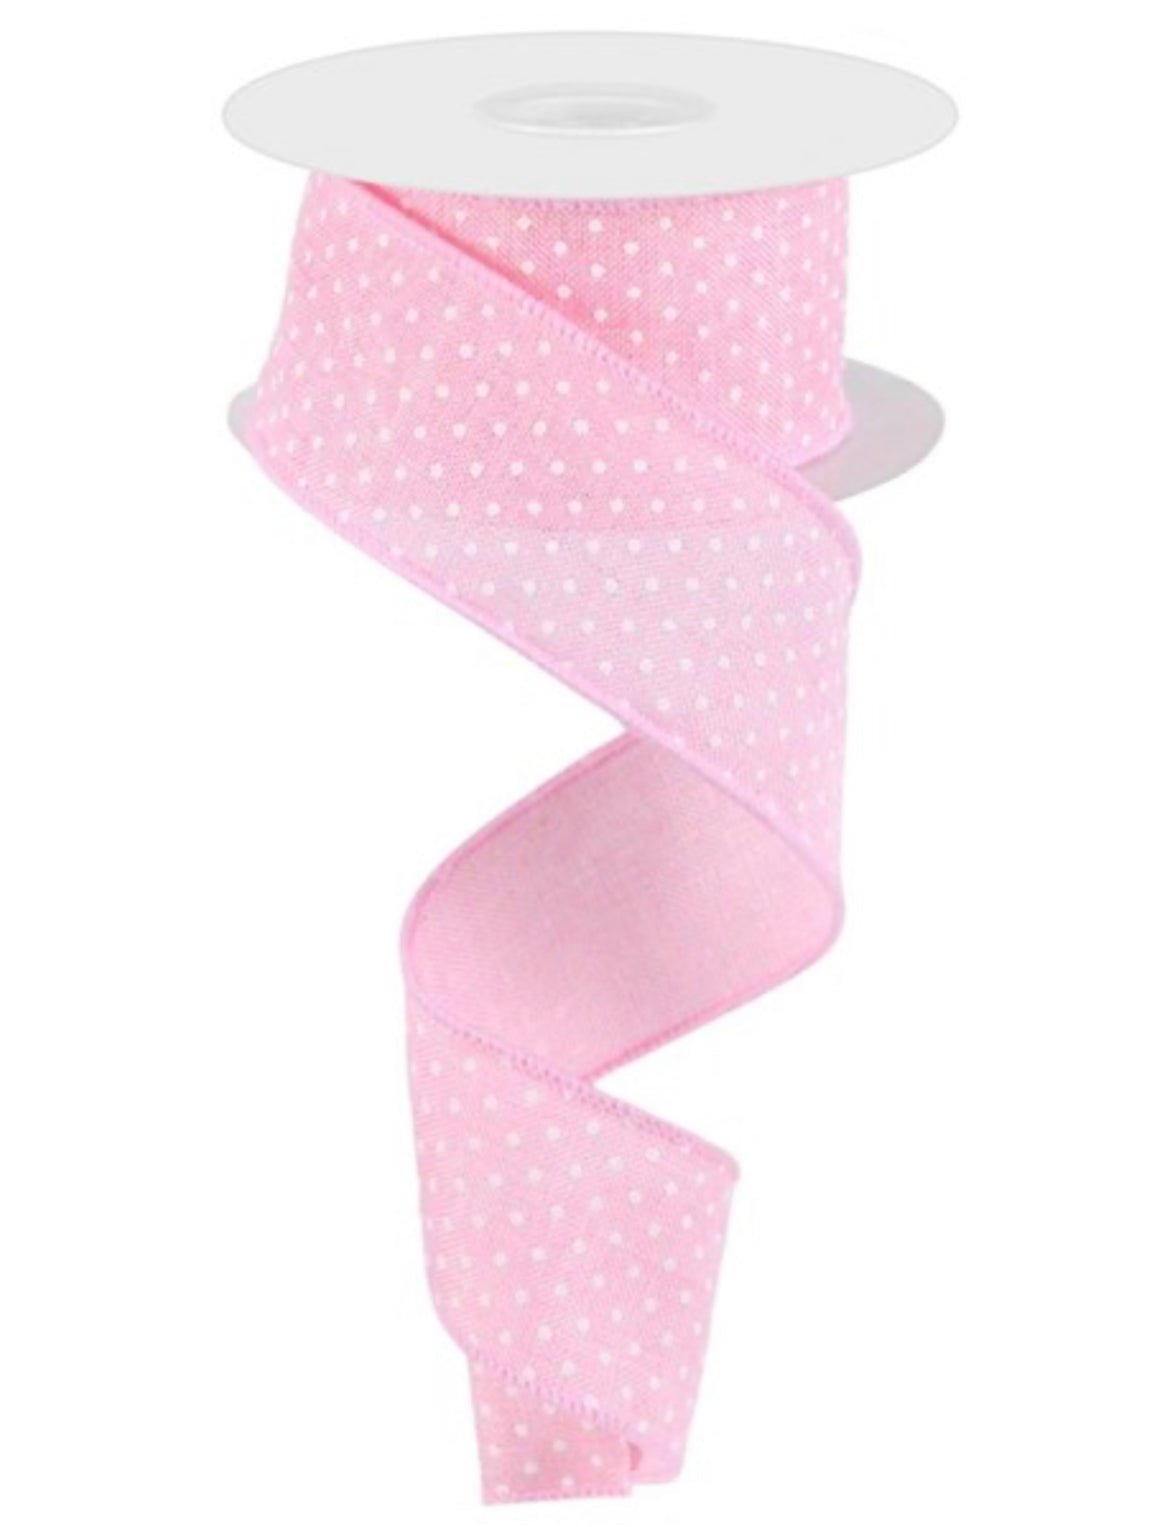 Pink with white raised dots ribbon 1.5